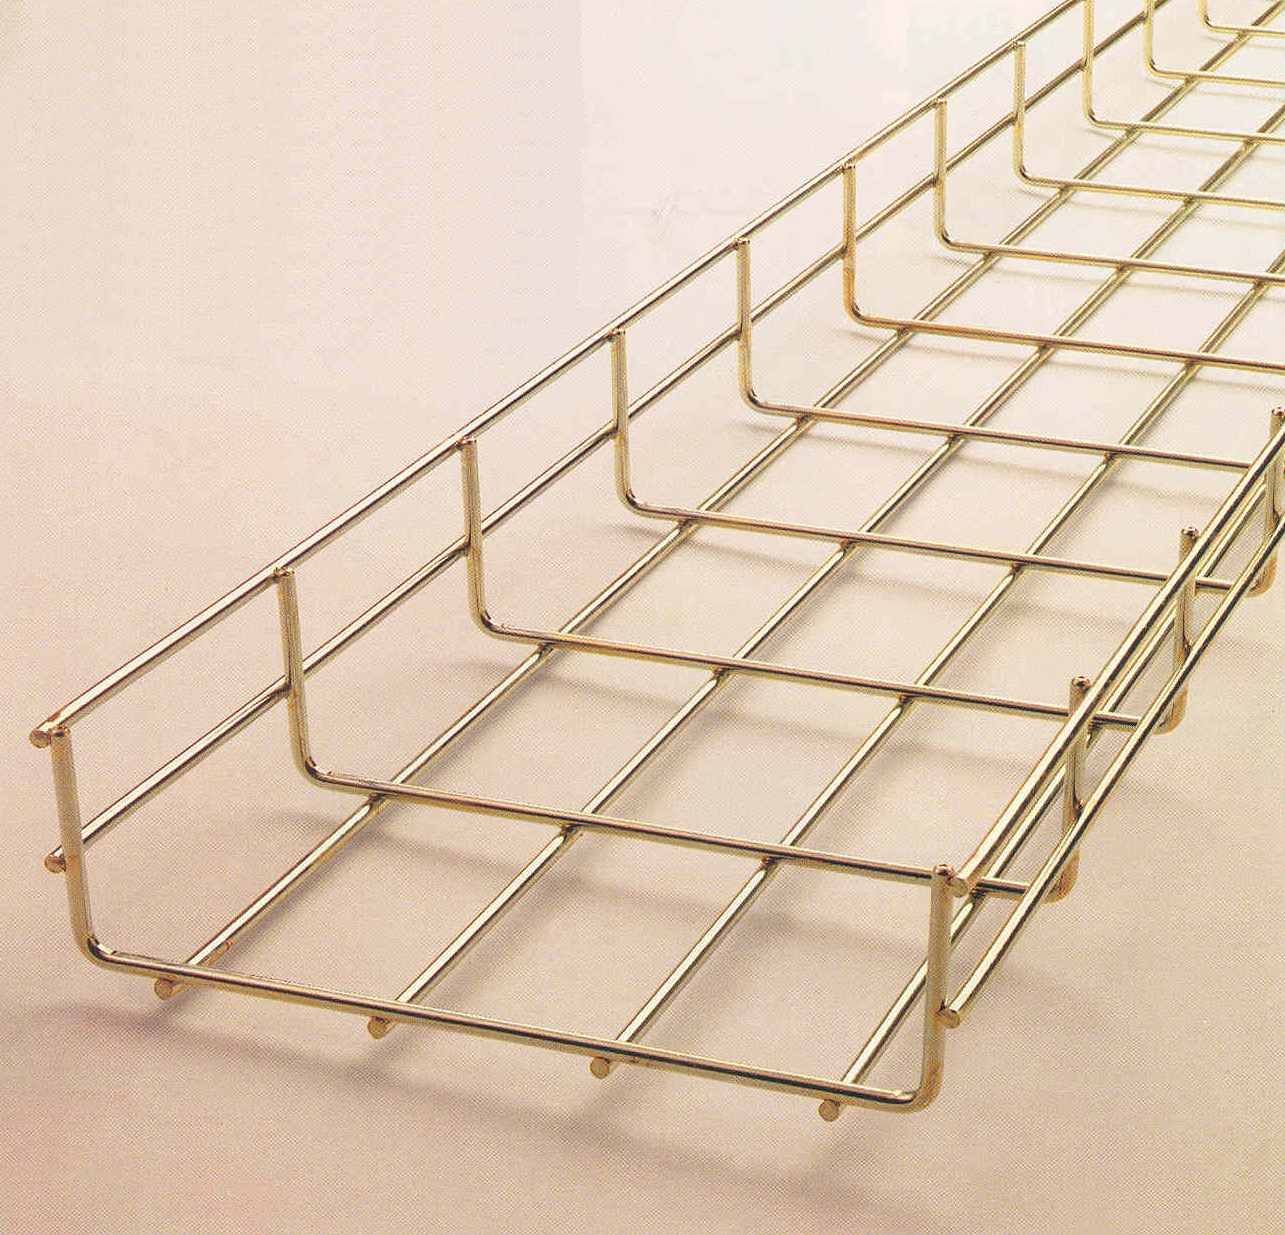 Mesh cable tray